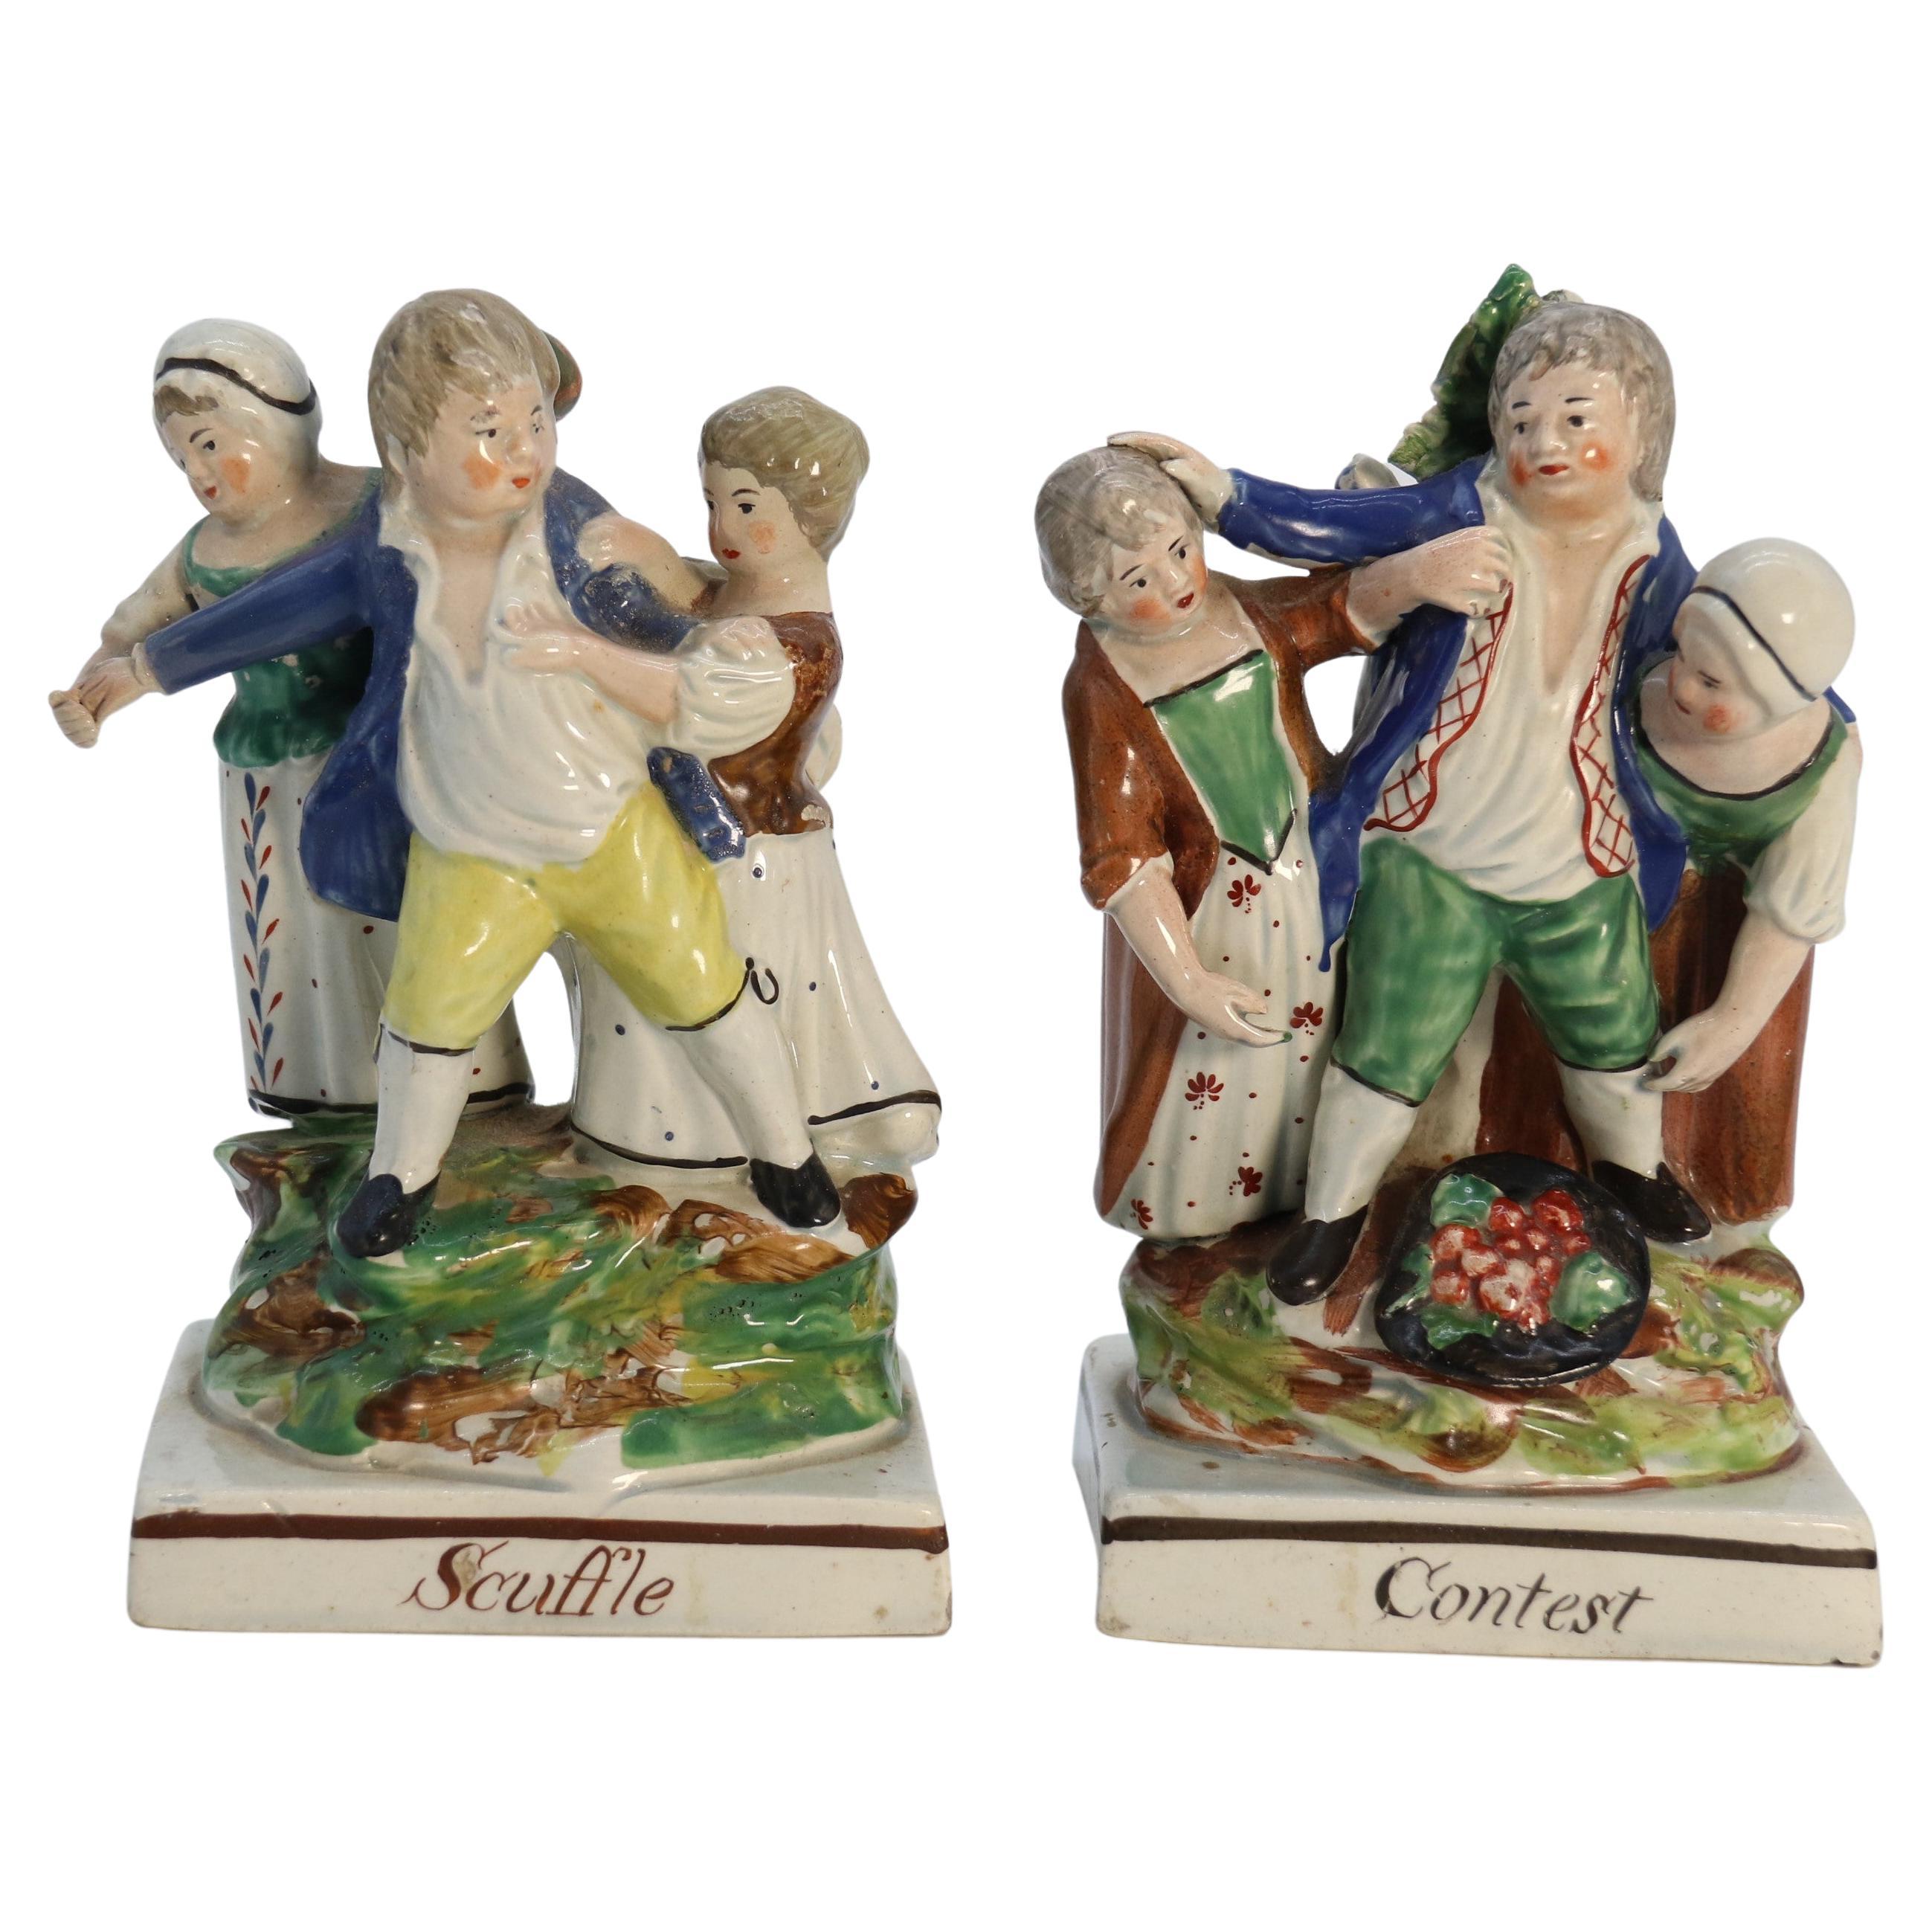 Late 18th Century English Staffordshire Figure Group "Scuffle and Contest"